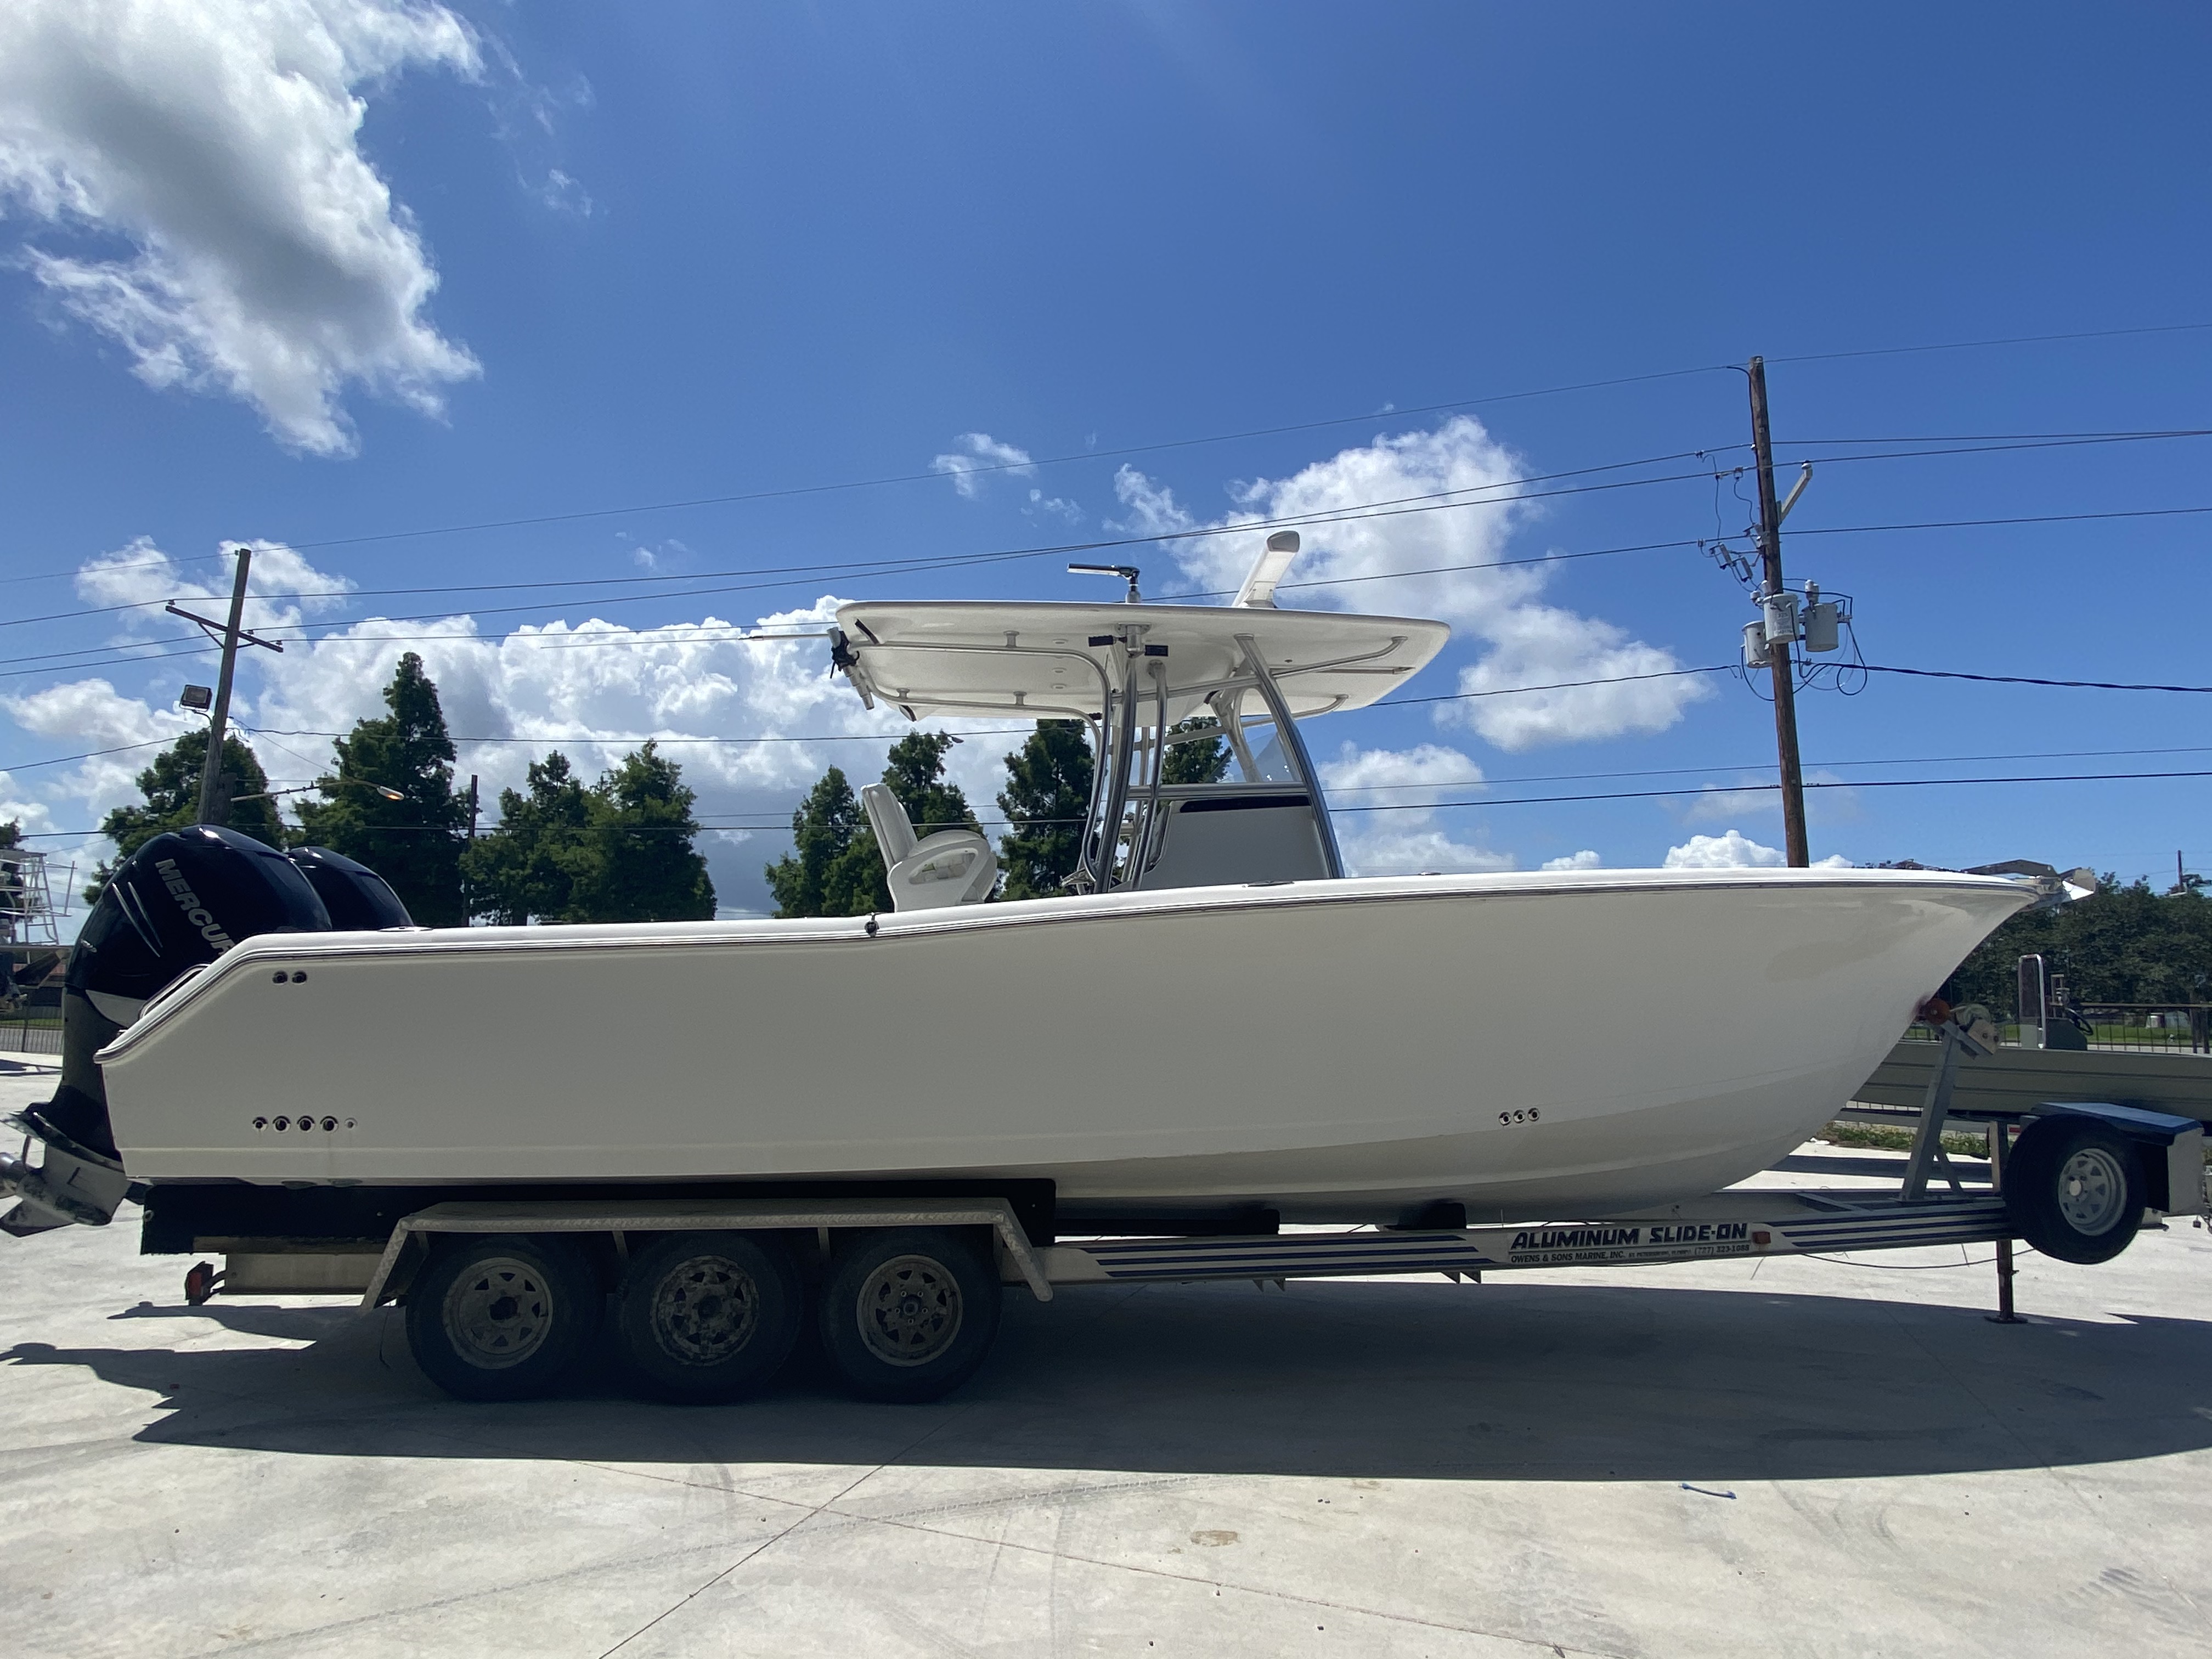 2008 Sea Hunt boat for sale, model of the boat is 29 Gamefish & Image # 28 of 31